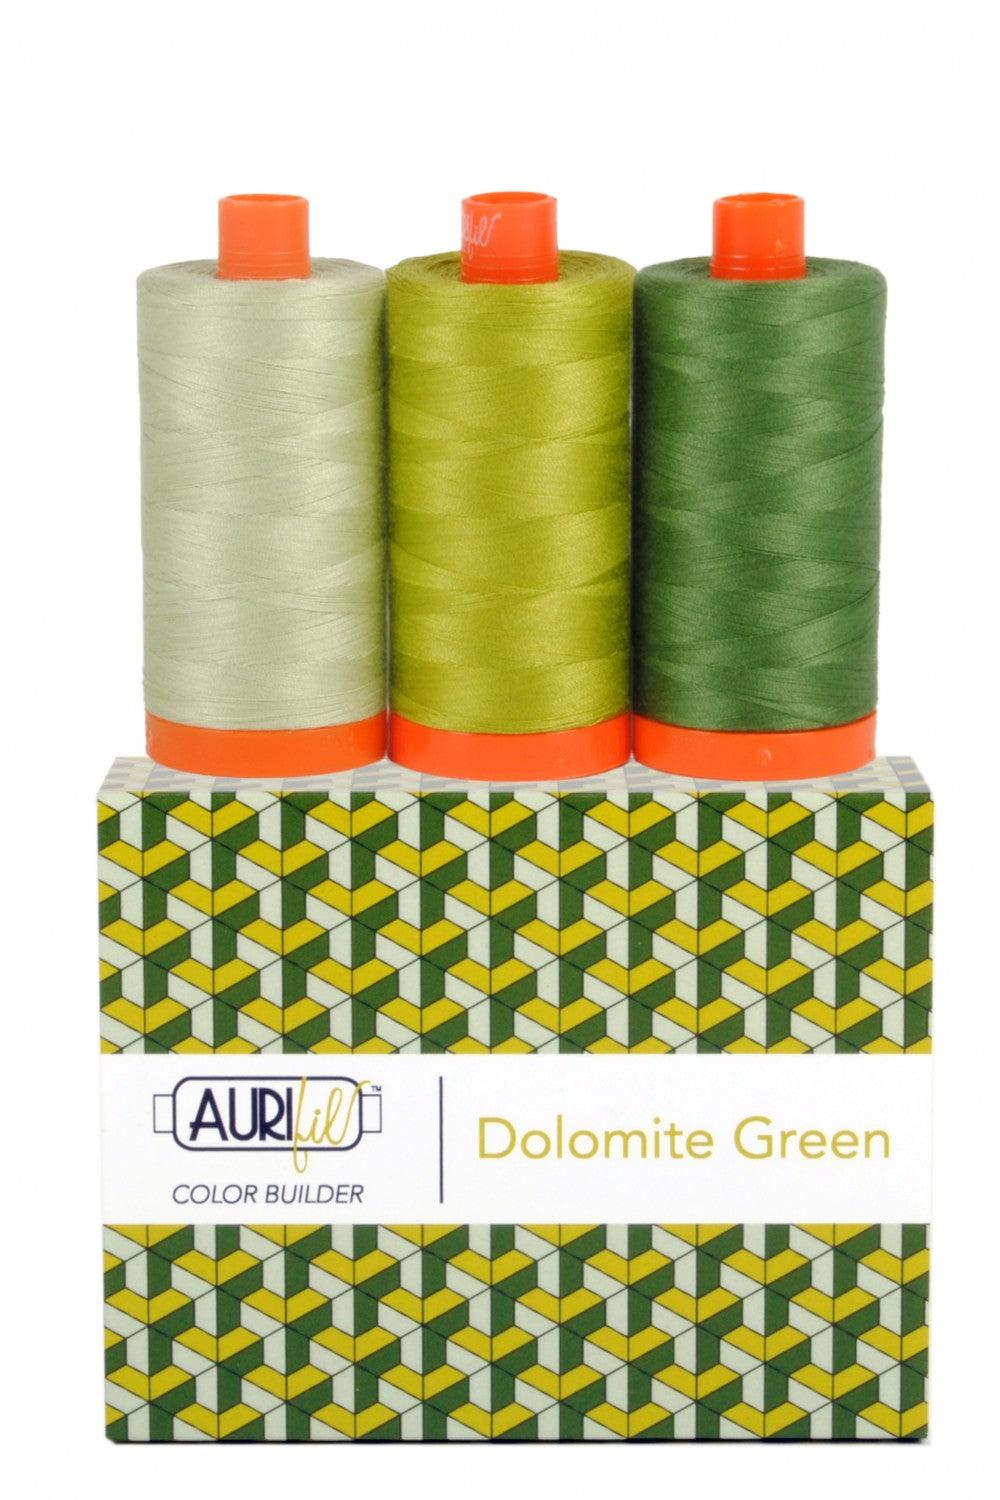 Dolemites Green, Color Builder, Aurifil, 1300m, Package of 3 - Kawartha Quilting and Sewing LTD.